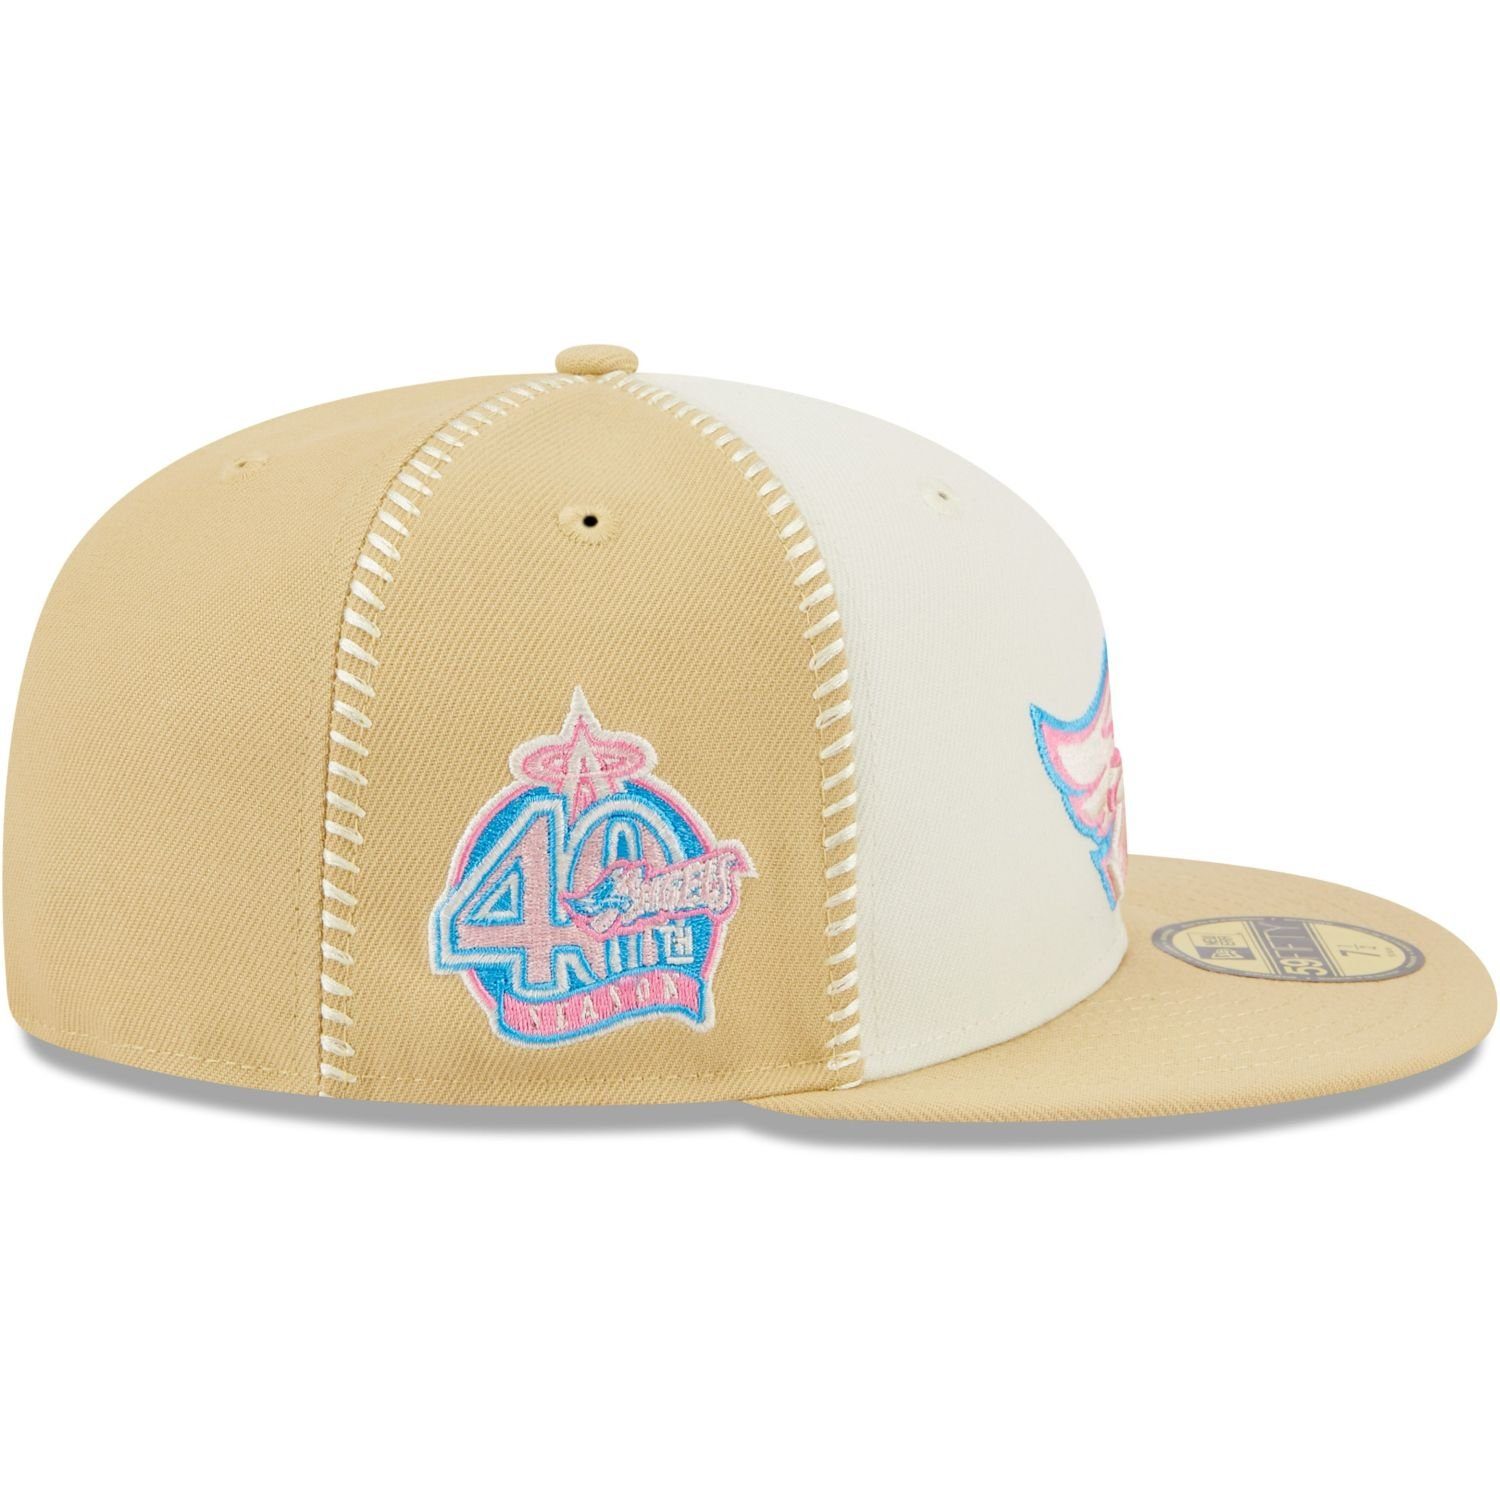 Fitted SEAM 59Fifty Era New Los Angels STITCH Angeles Cap